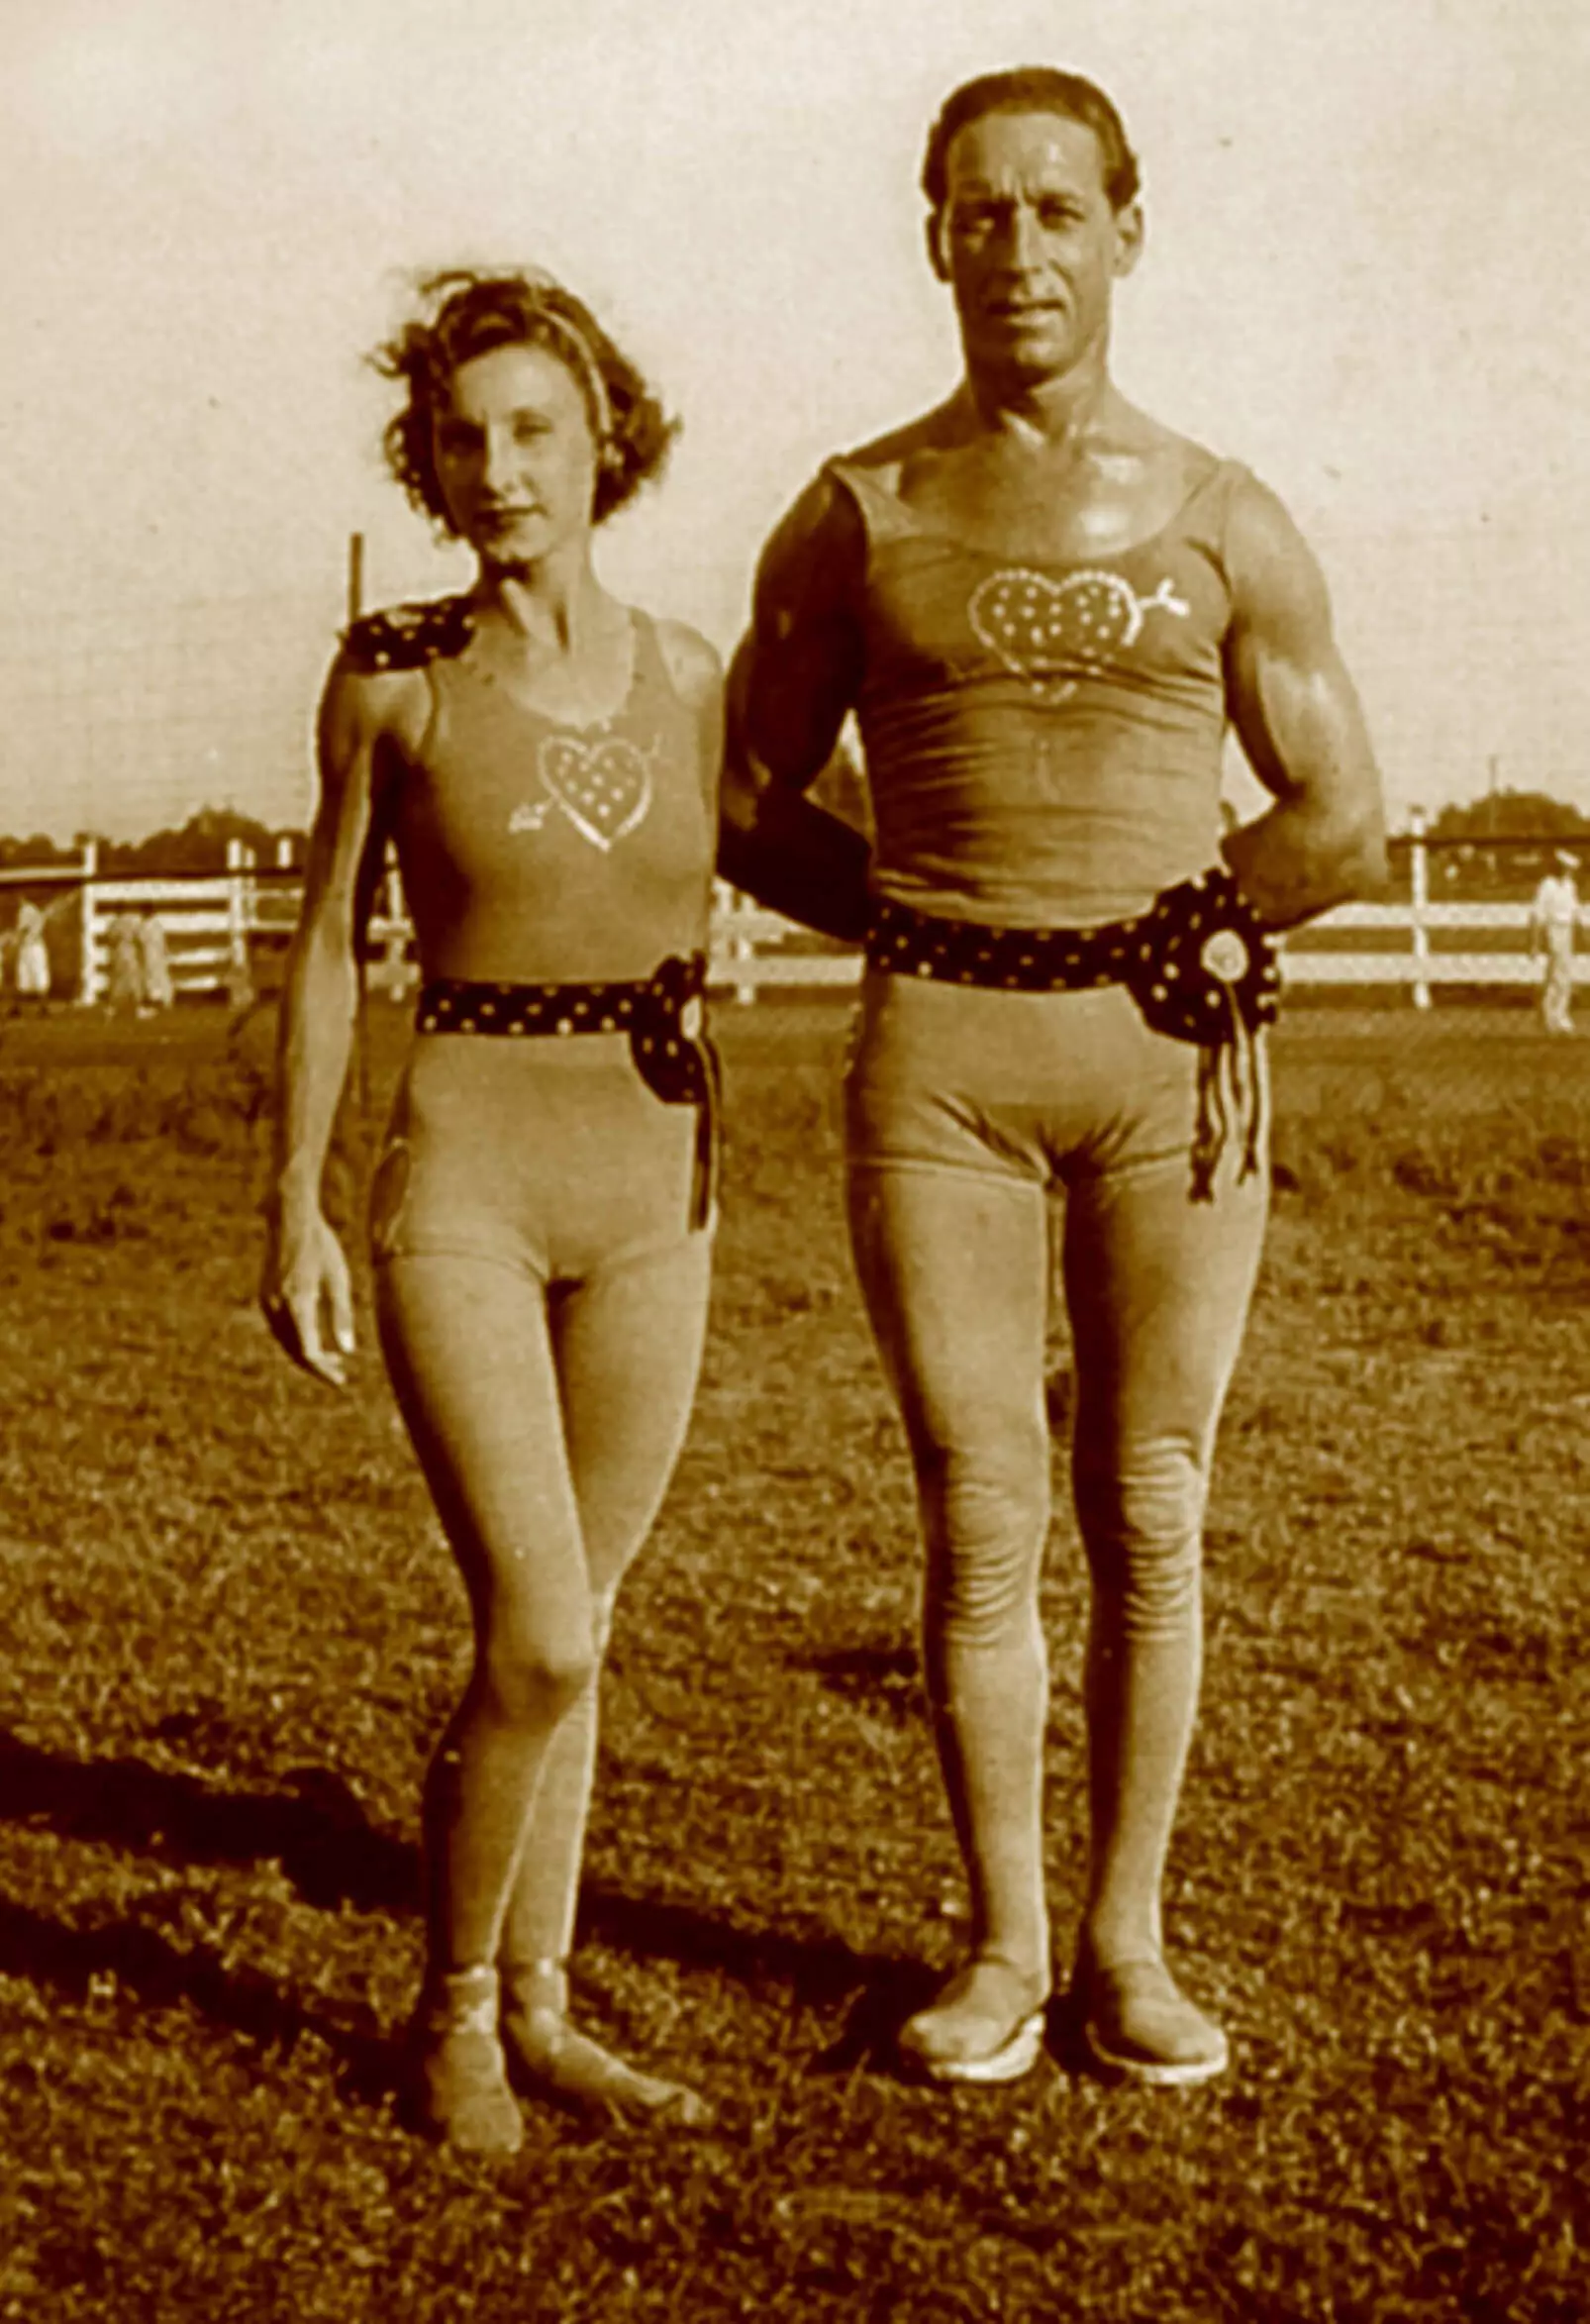 They are standing outdoors in the grass. They are wearing matching outfits, skin tight leotard with a tank top style at the top, shorts at the bottom. On their chest is a heart design with an arrow through the middle. They have a decorative ribbon belt around their waists, and tights cover their entire legs and feet.